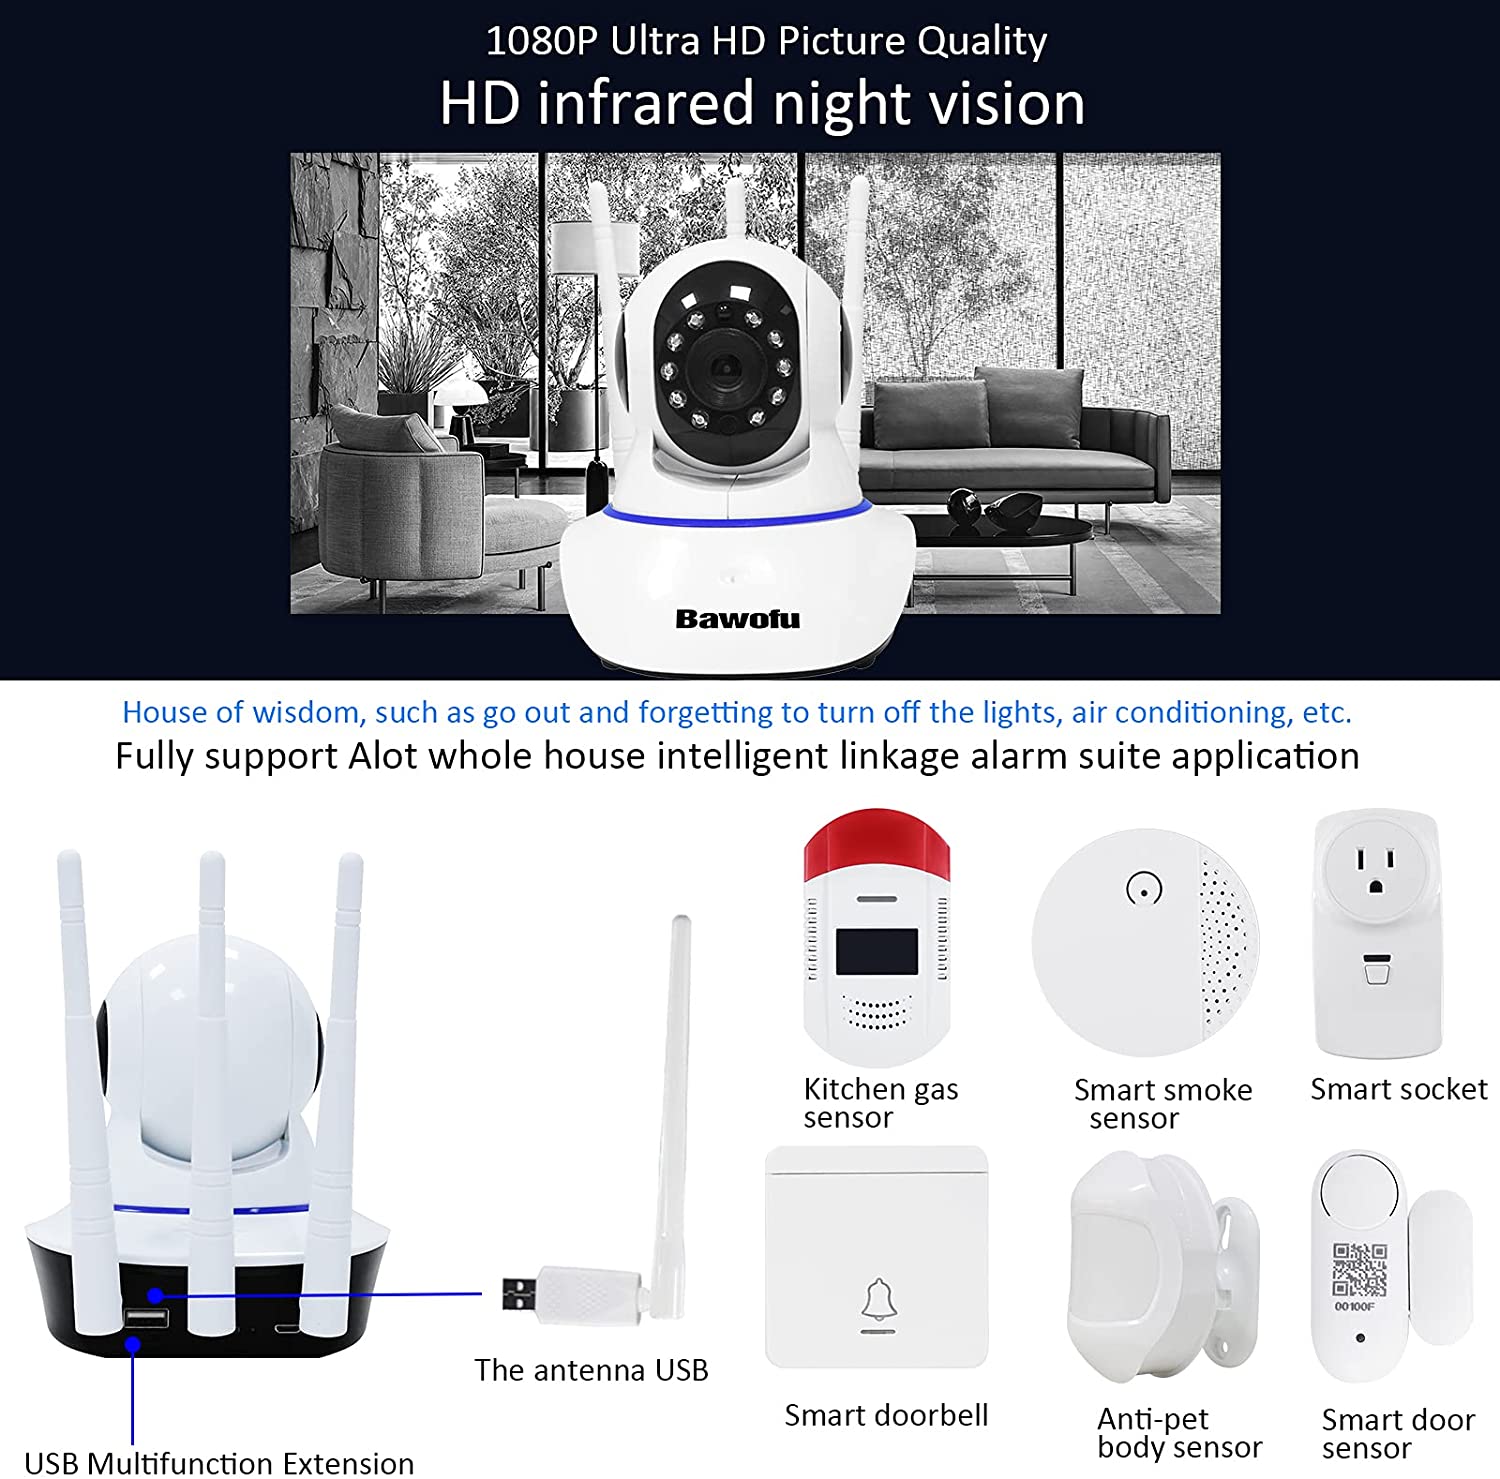 1080P Home Wireless Indoor IP Security Camera with 2 Way Audio, Support 4G Data Card Tray Expansion and USB Antenna, Free Motion Alerts Night Vision for Pet/Nanny Compatible SD Card up to 128G